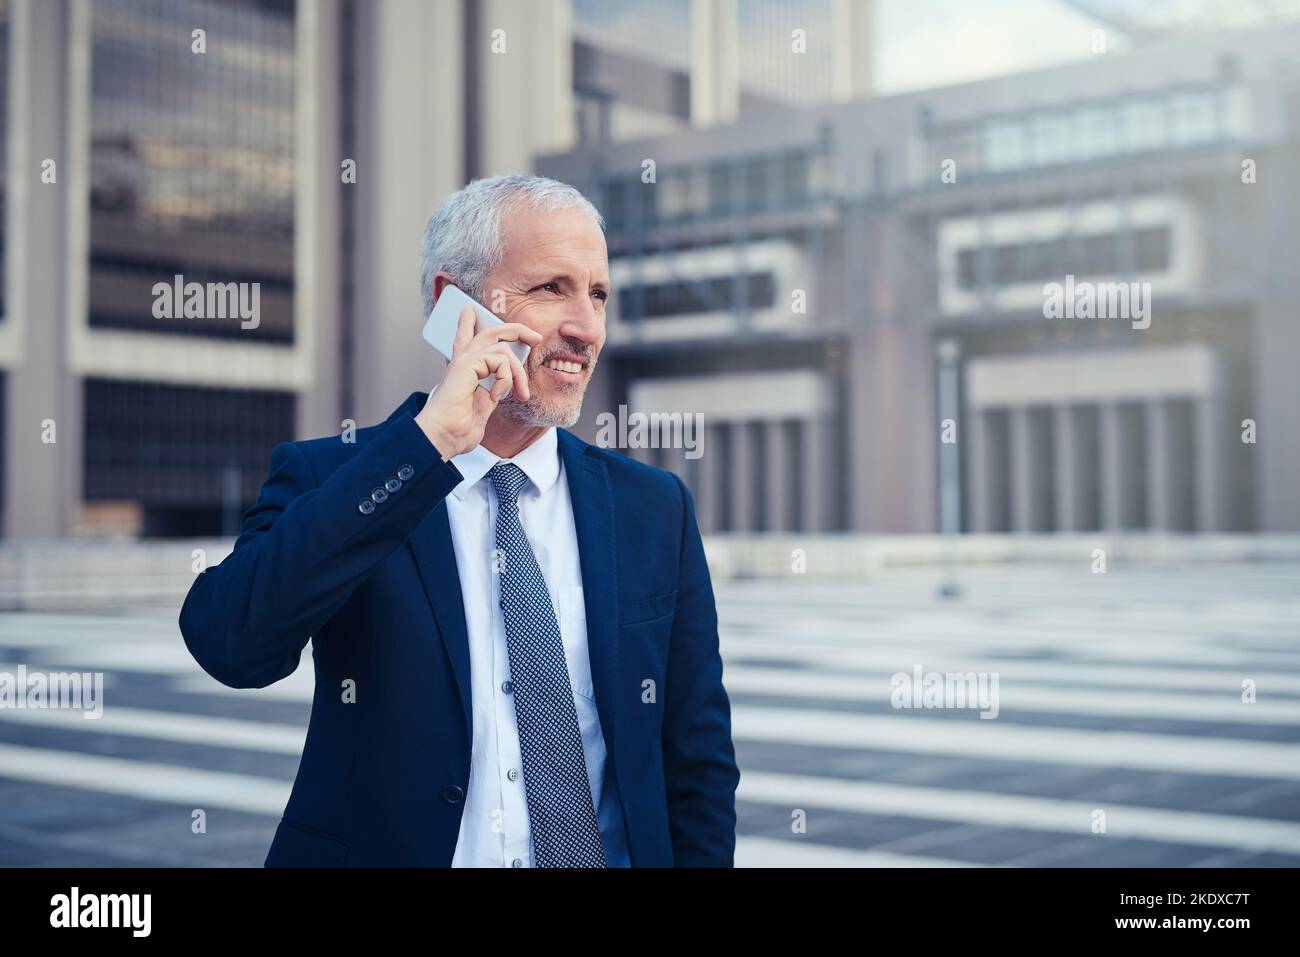 Hes a businessman on the move. a businessman answering his phone while walking to his office in the city. Stock Photo